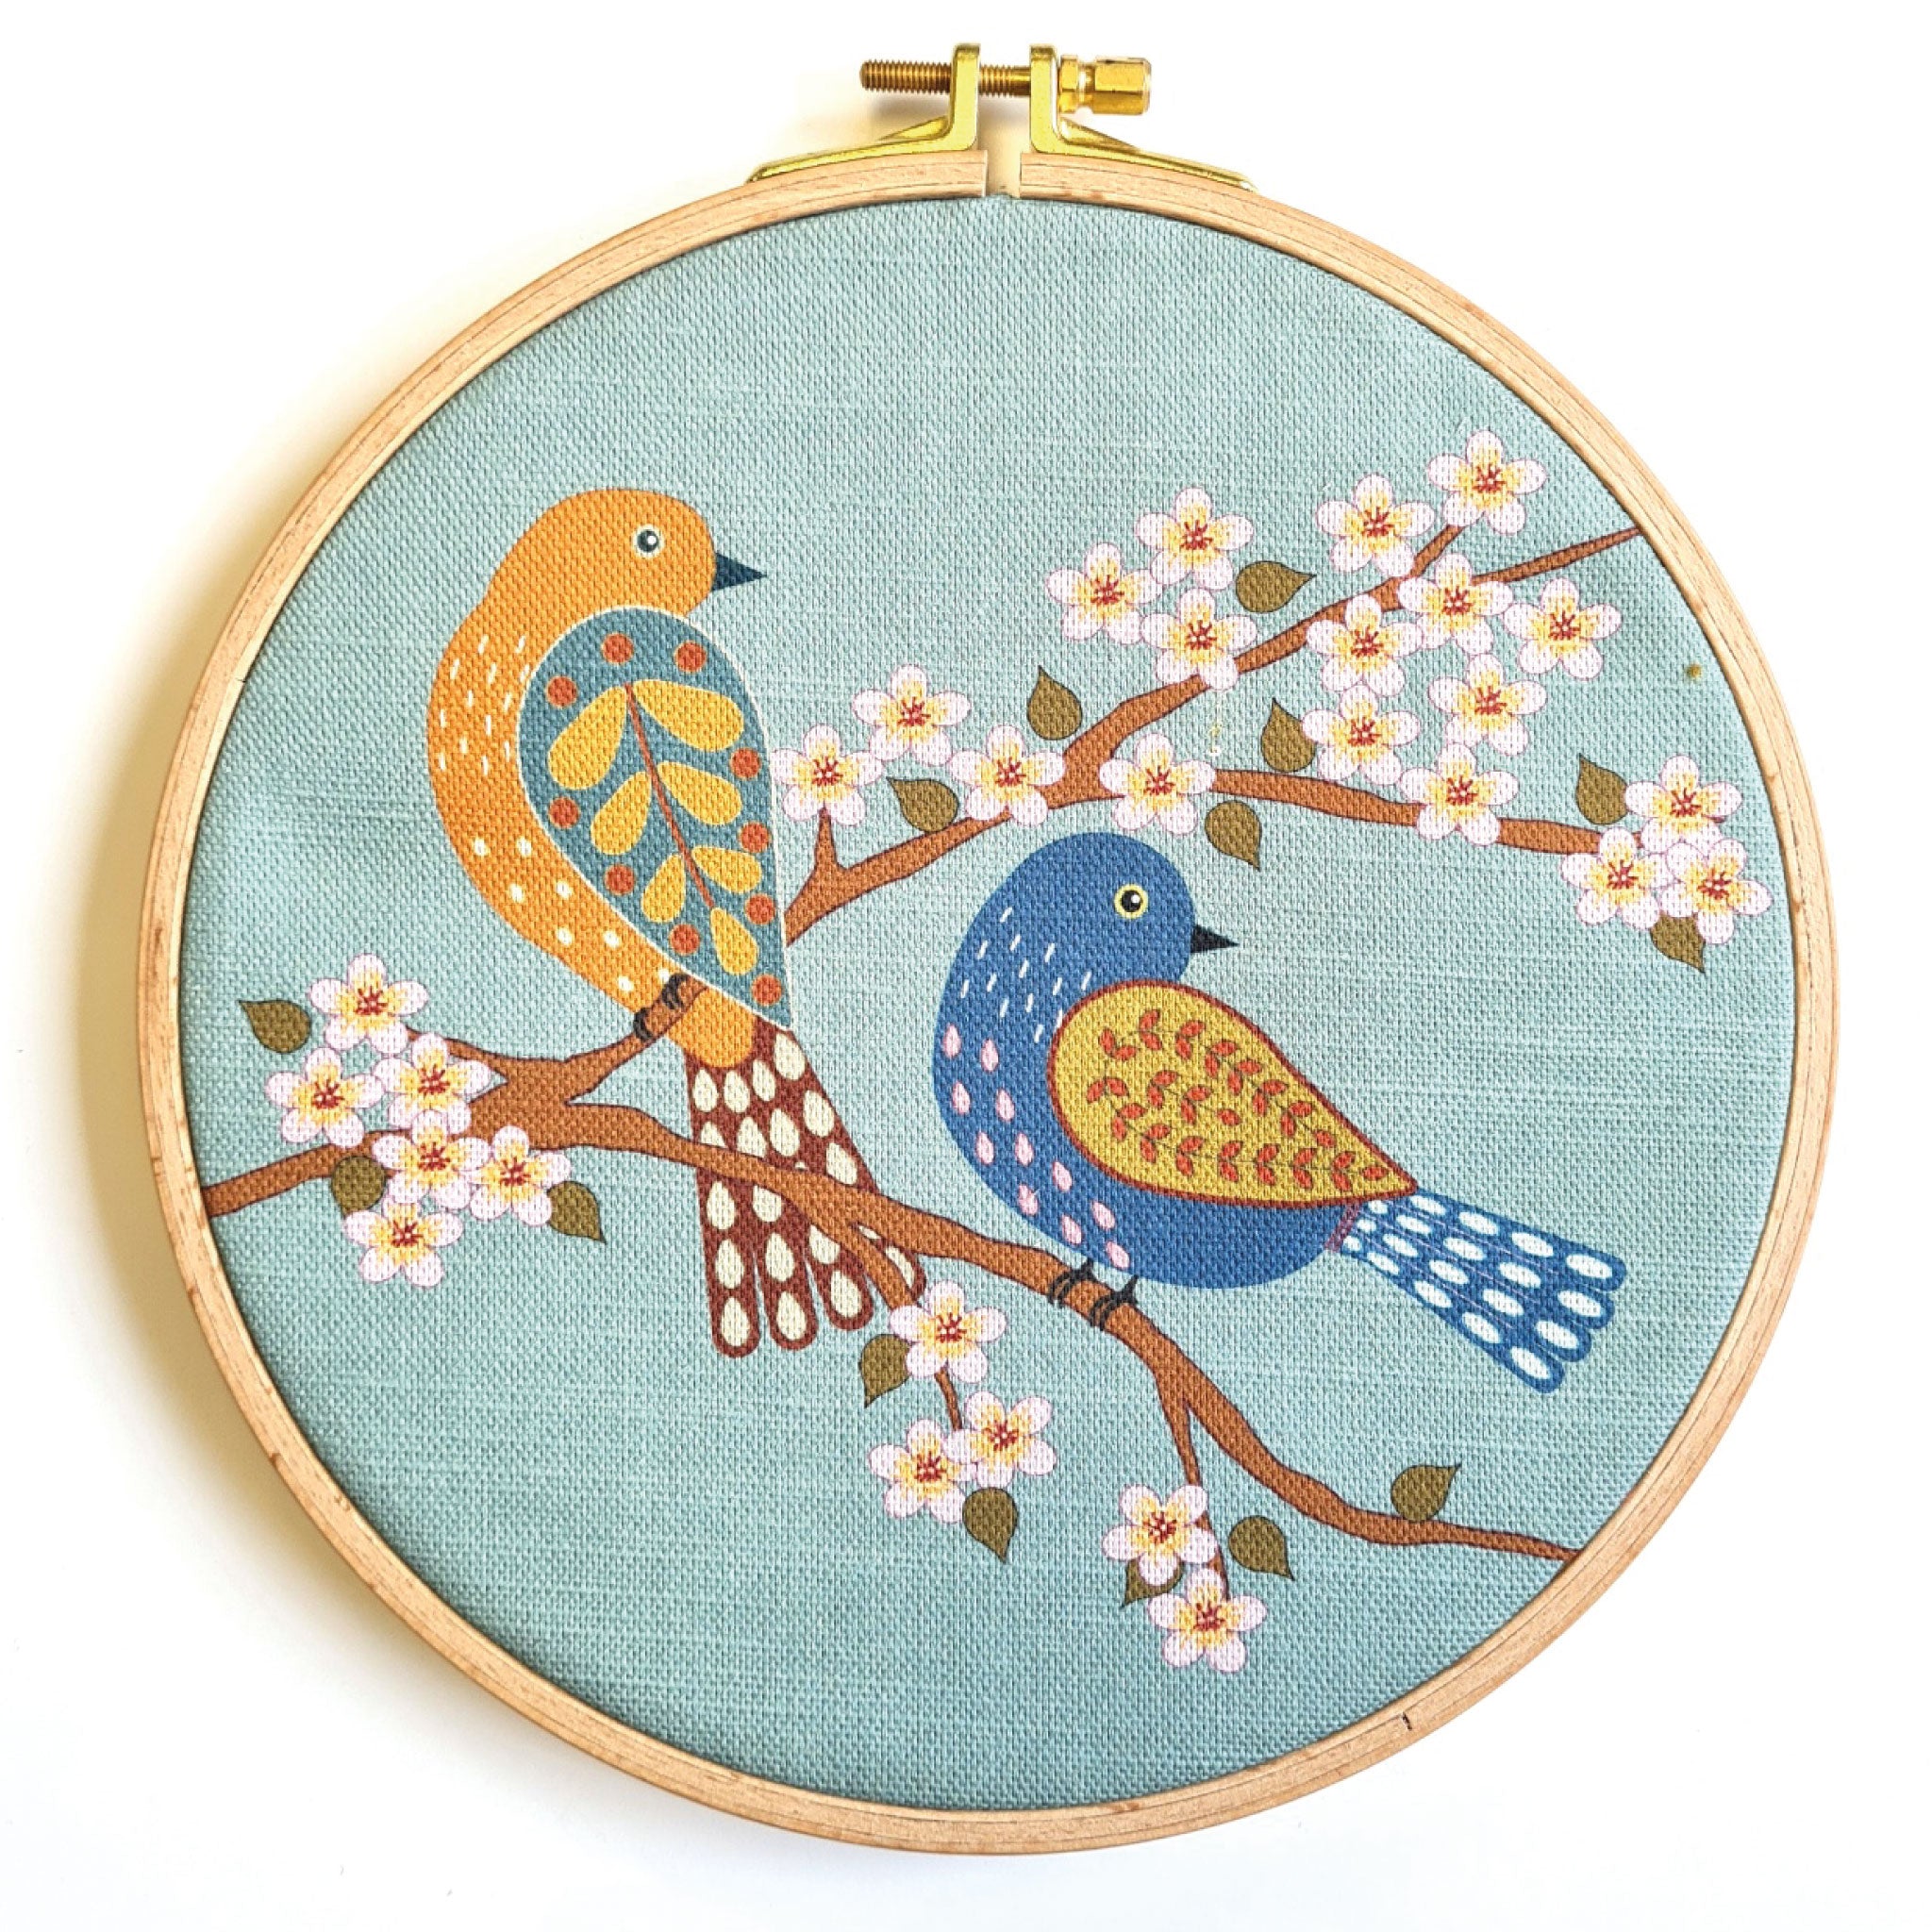 Embroidery kit 'Birds and blossom' - Daphne's Diary